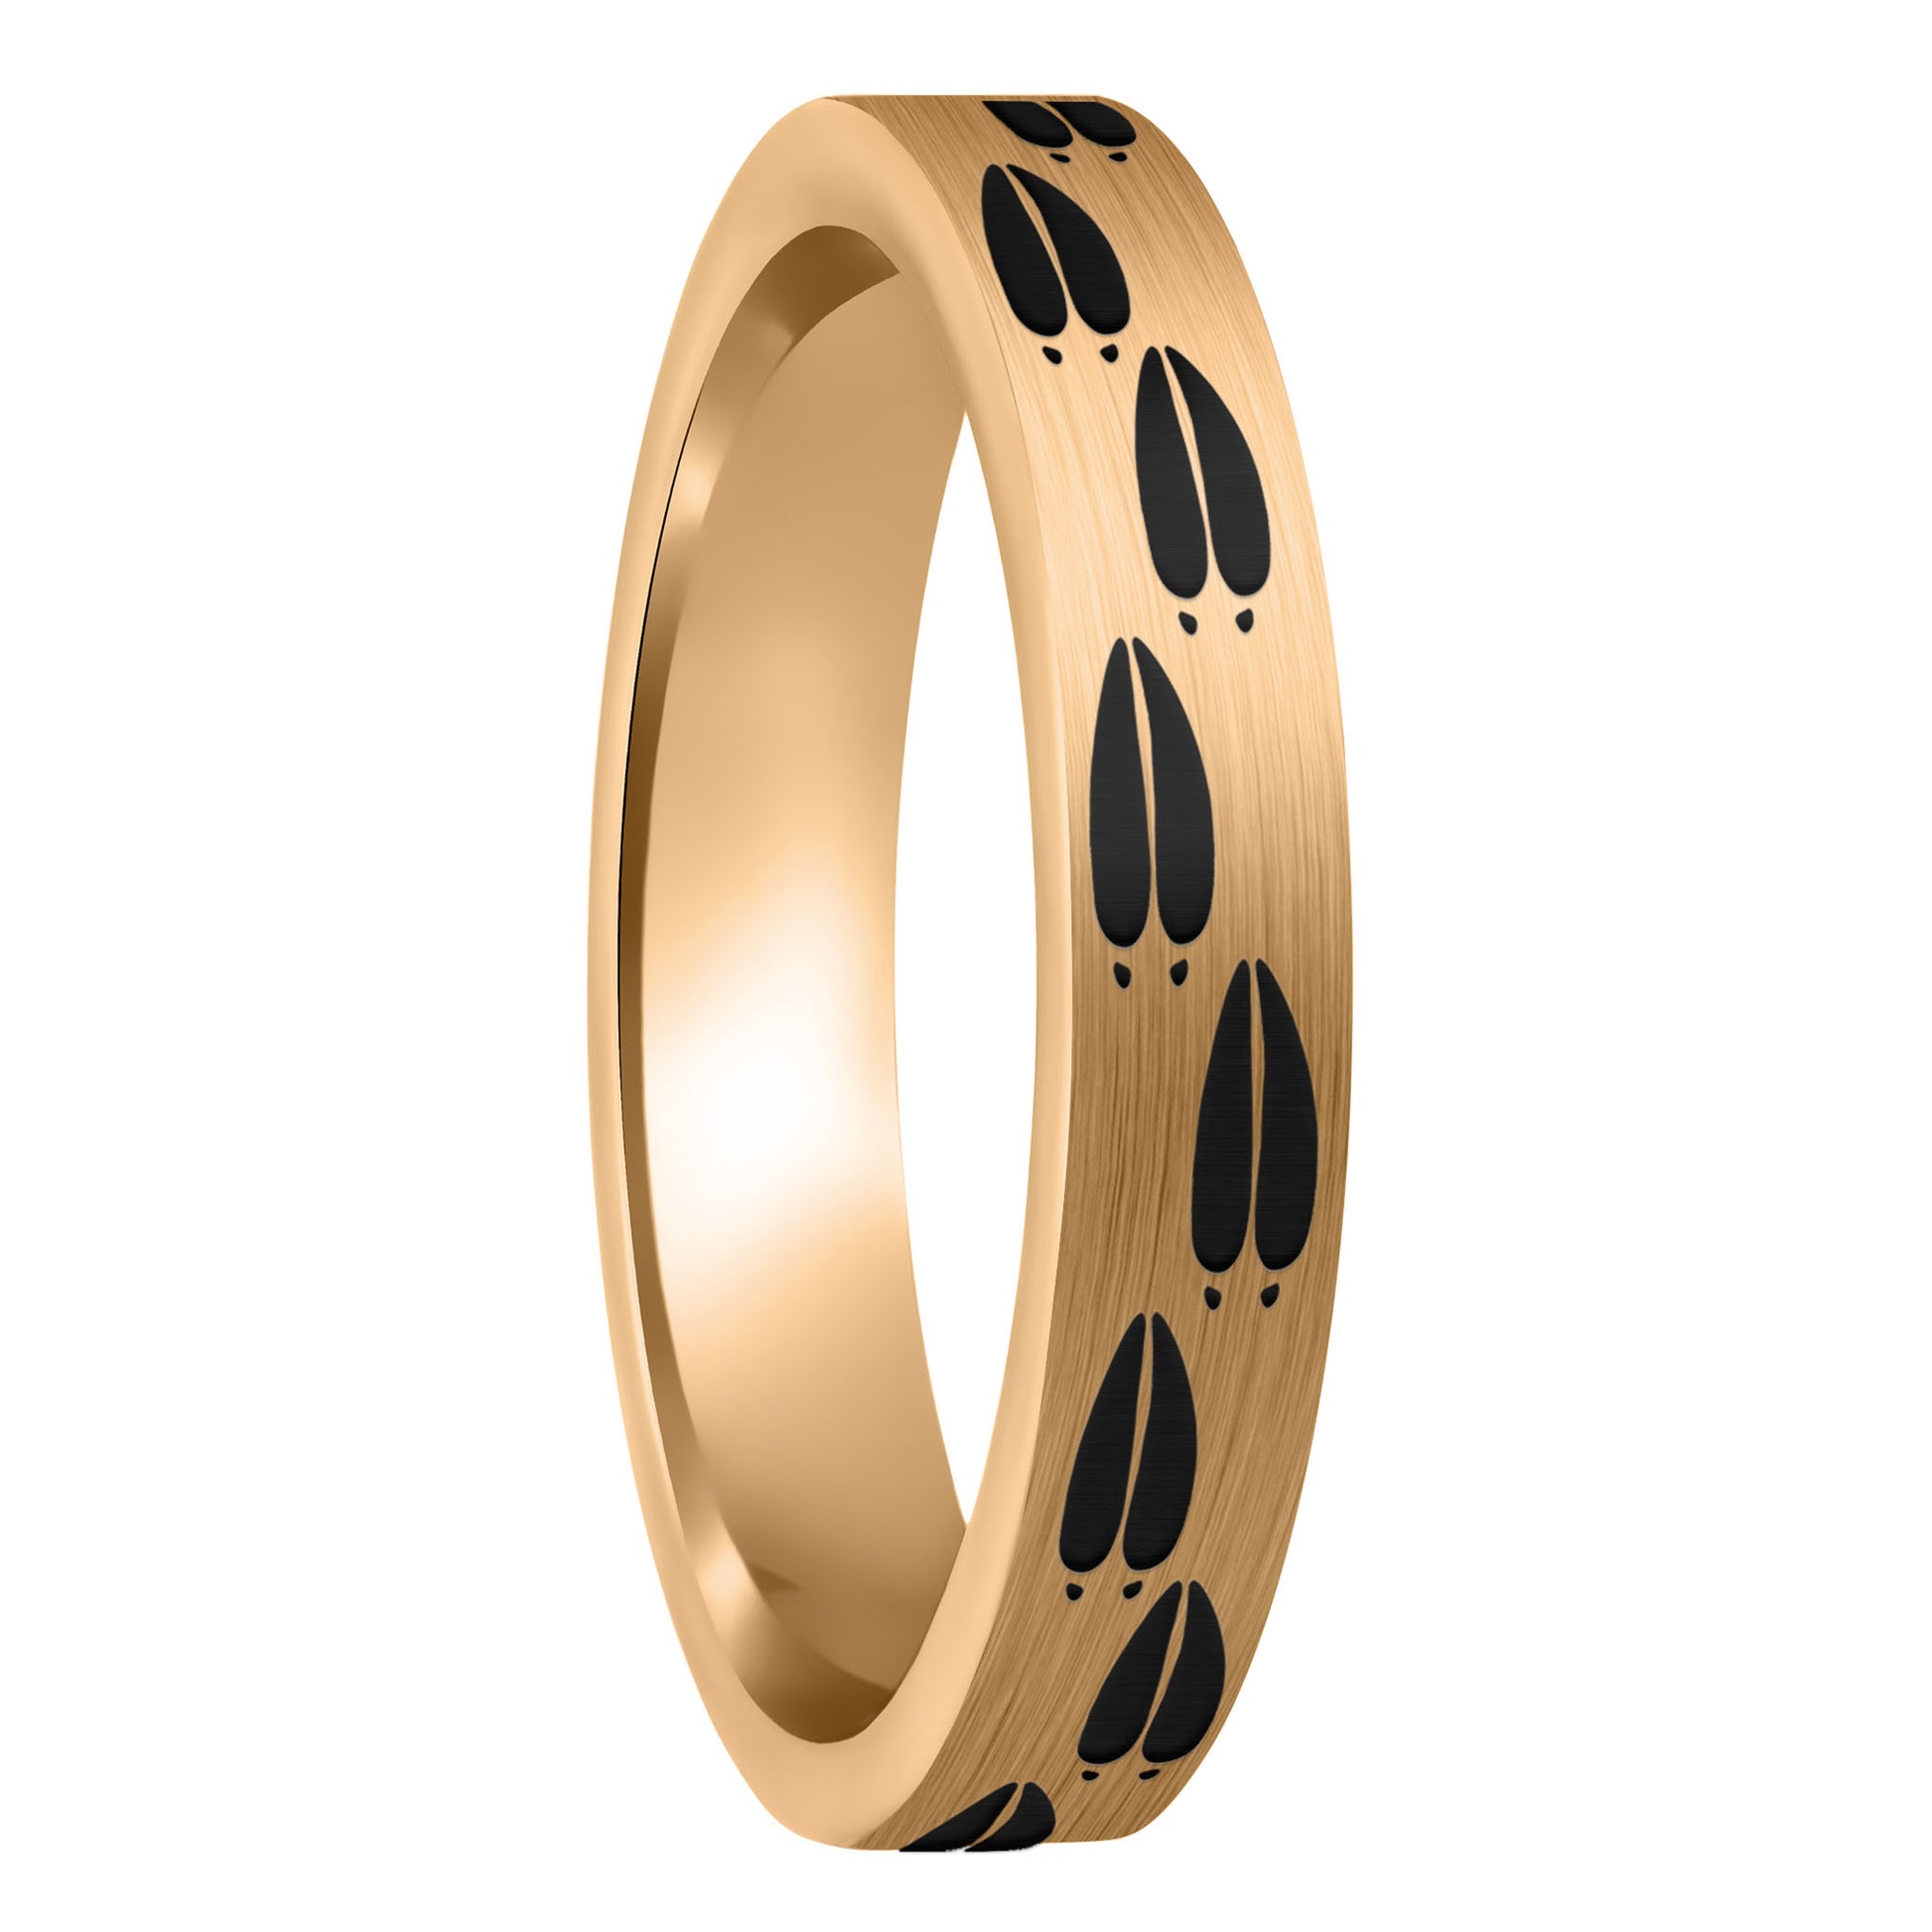 A moose tracks brushed rose gold tungsten women's wedding band displayed on a plain white background.